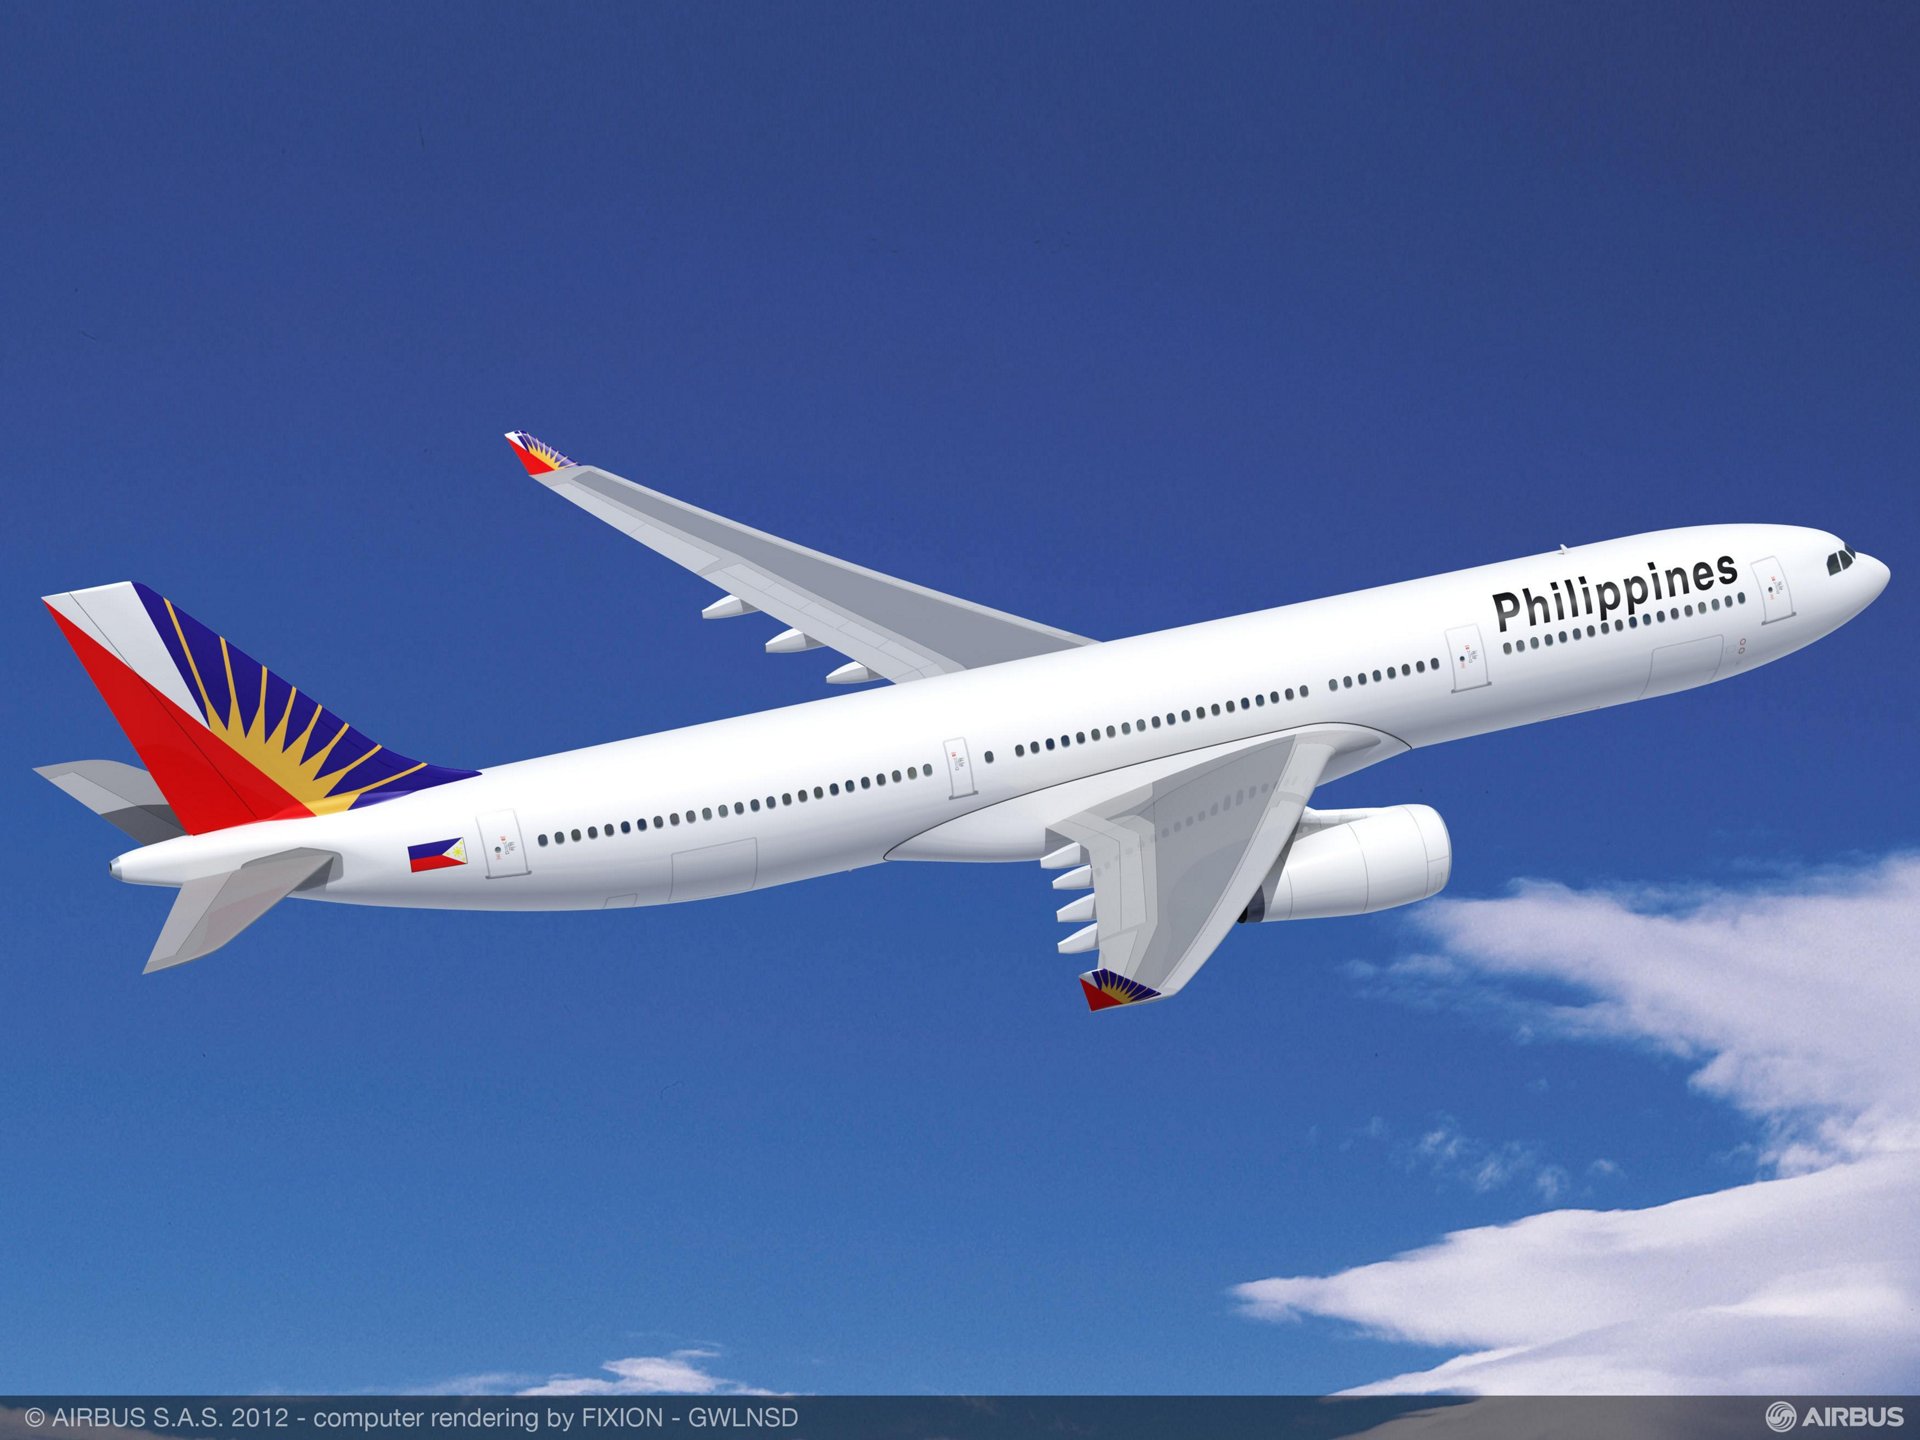 Philippine Airlines Orders 10 More A330s Commercial Aircraft Images, Photos, Reviews